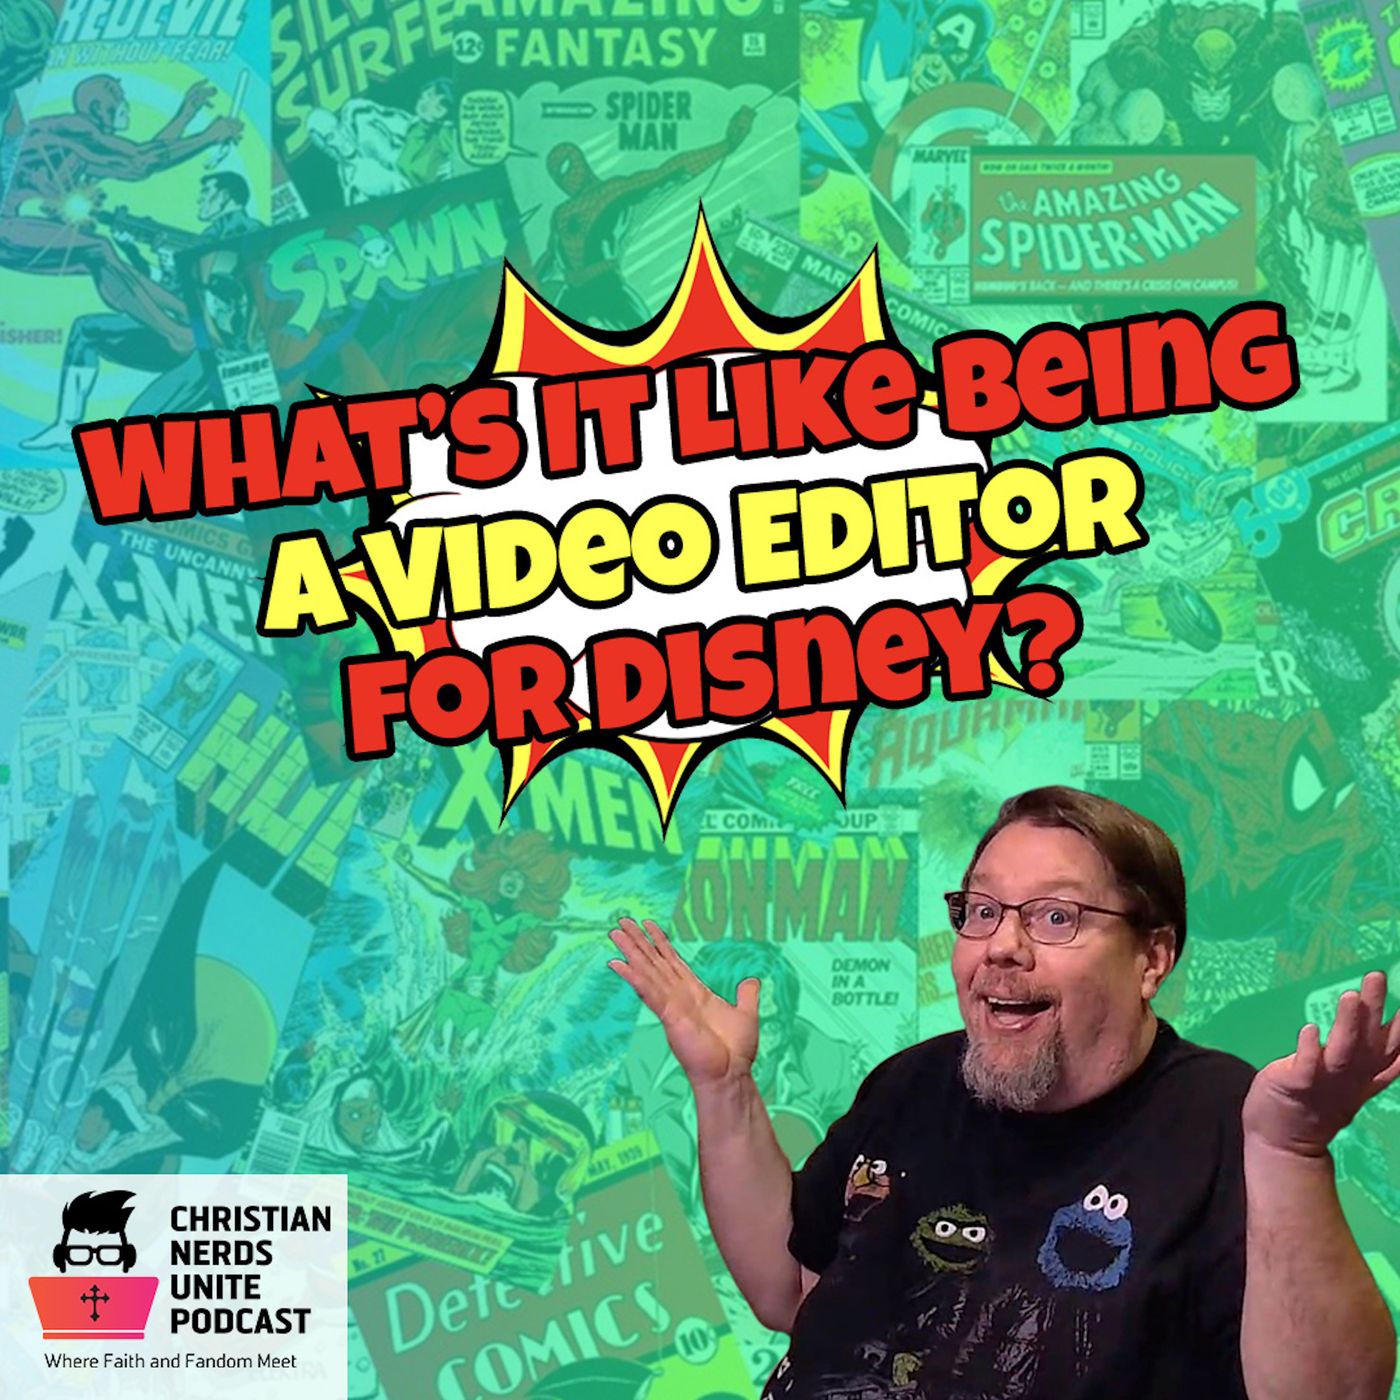 What's It Like Being a Video Editor for Disney?